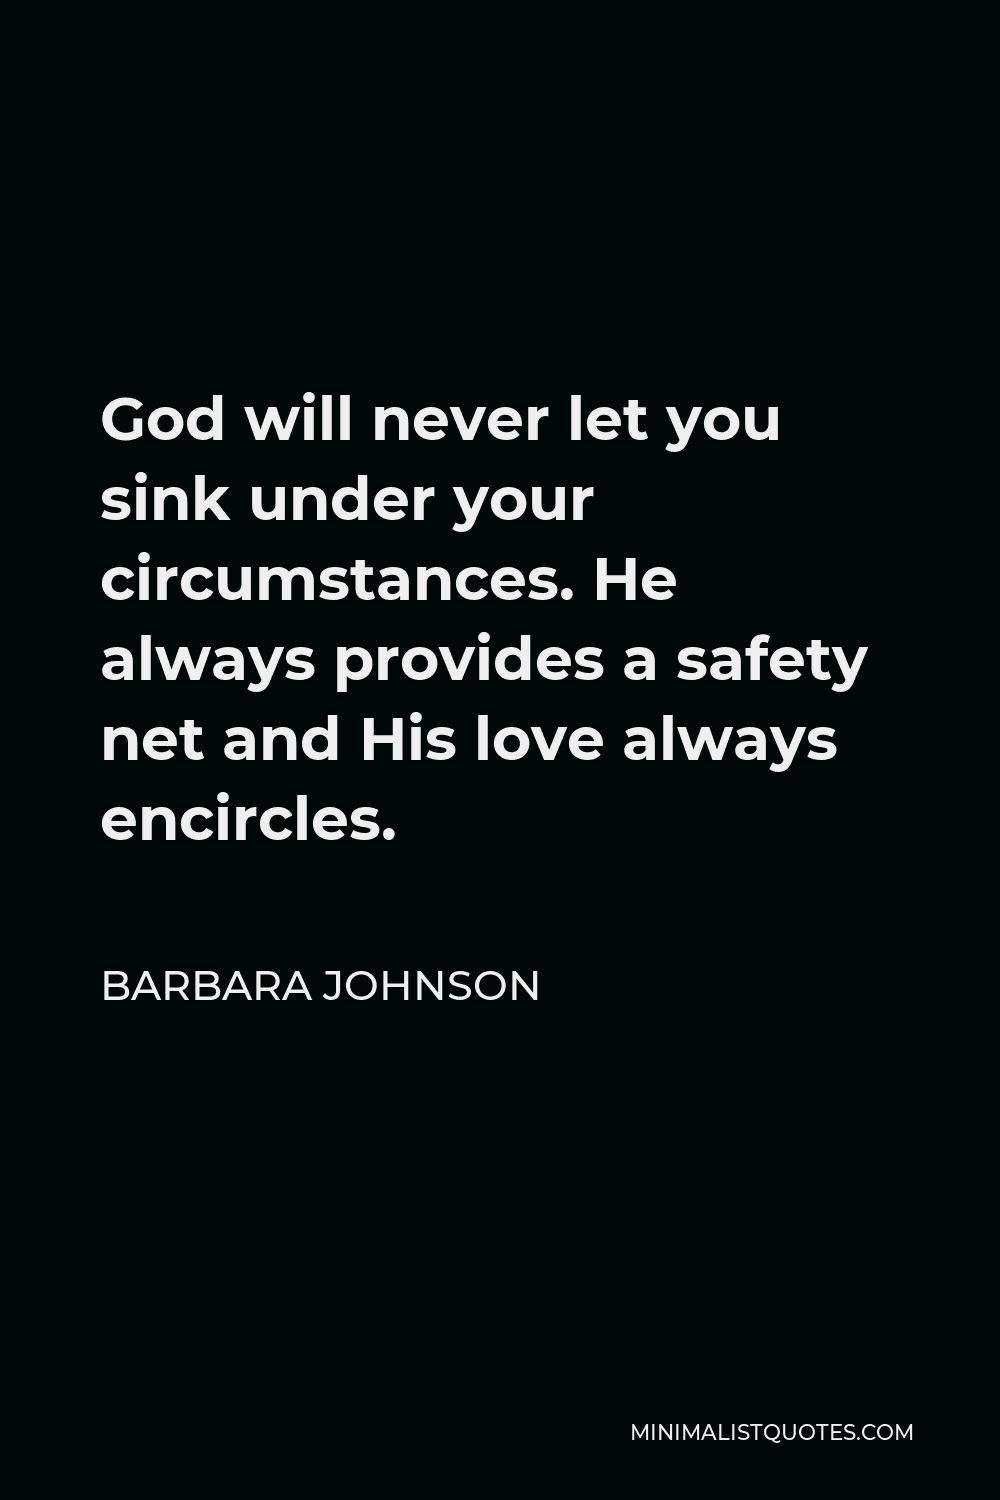 Barbara Johnson Quote - God will never let you sink under your circumstances. He always provides a safety net and His love always encircles.